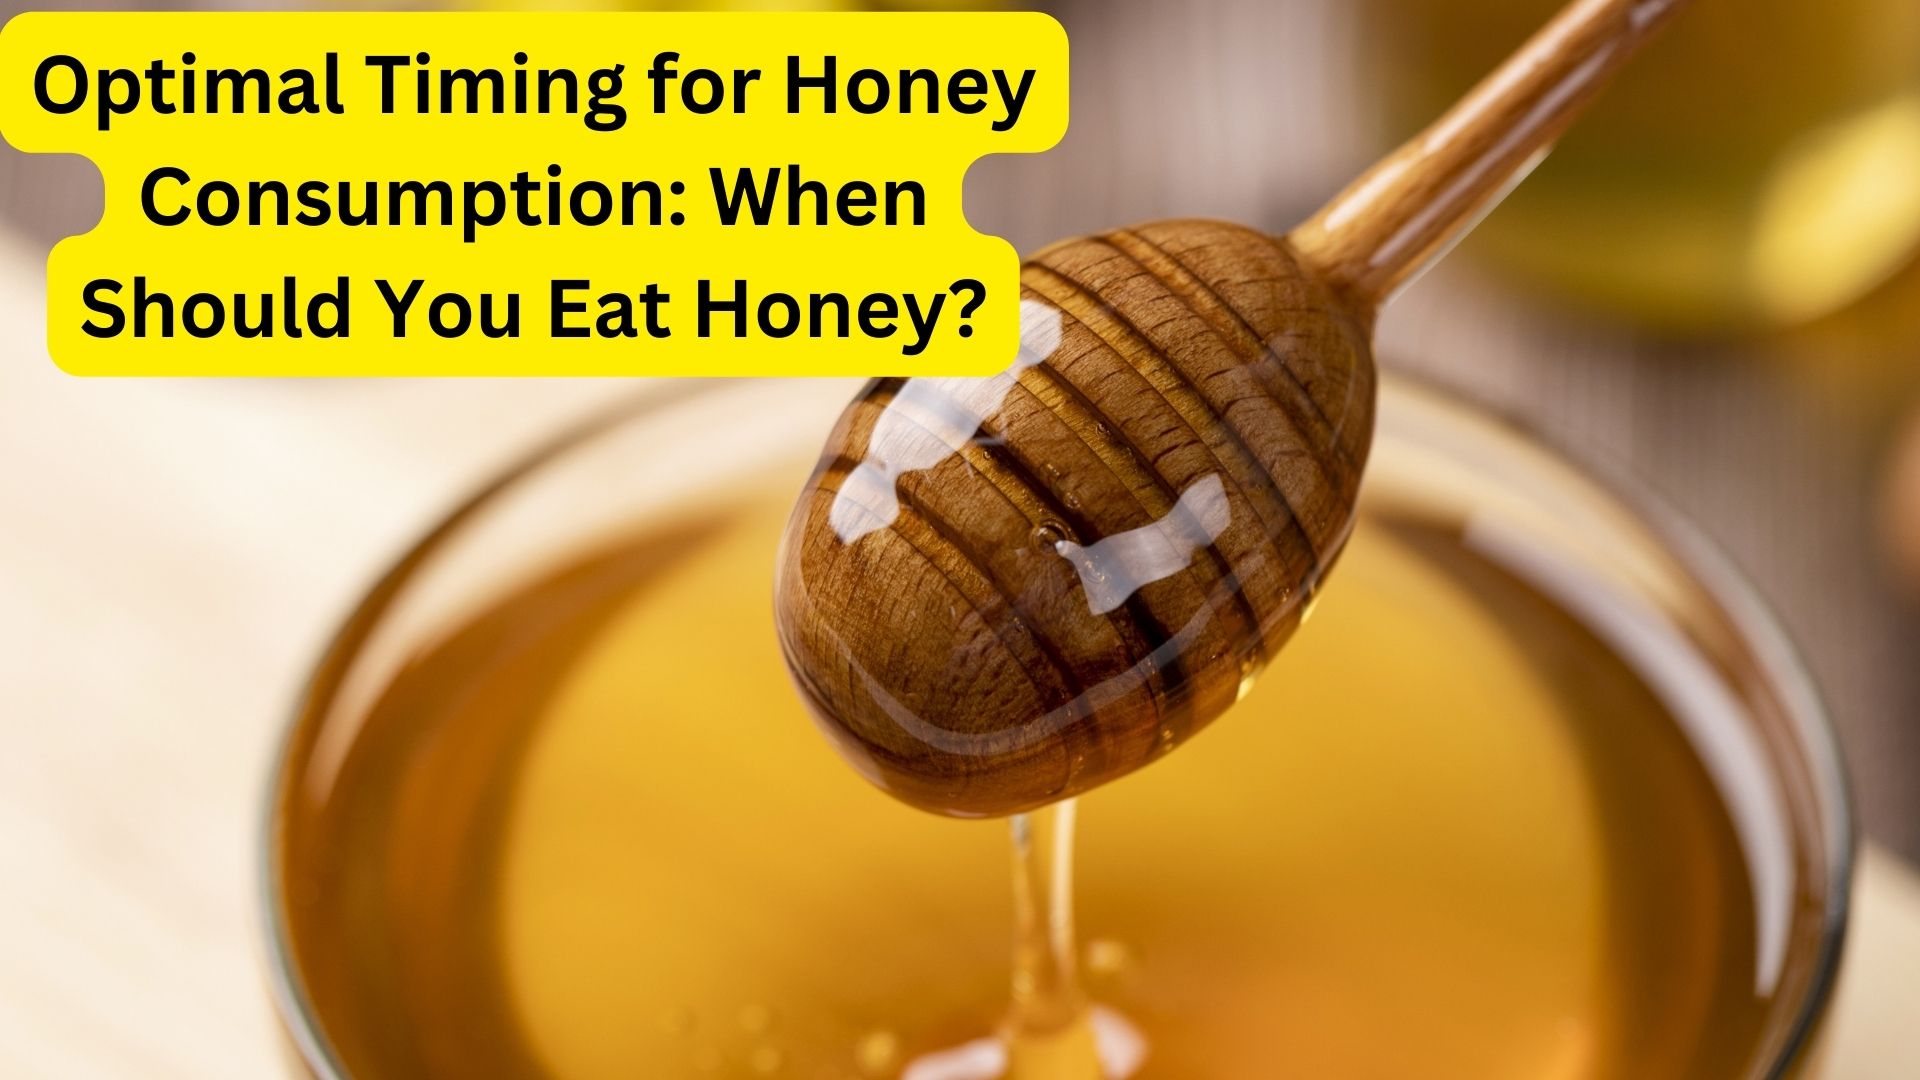 Optimal Timing for Honey Consumption: When Should You Eat Honey?